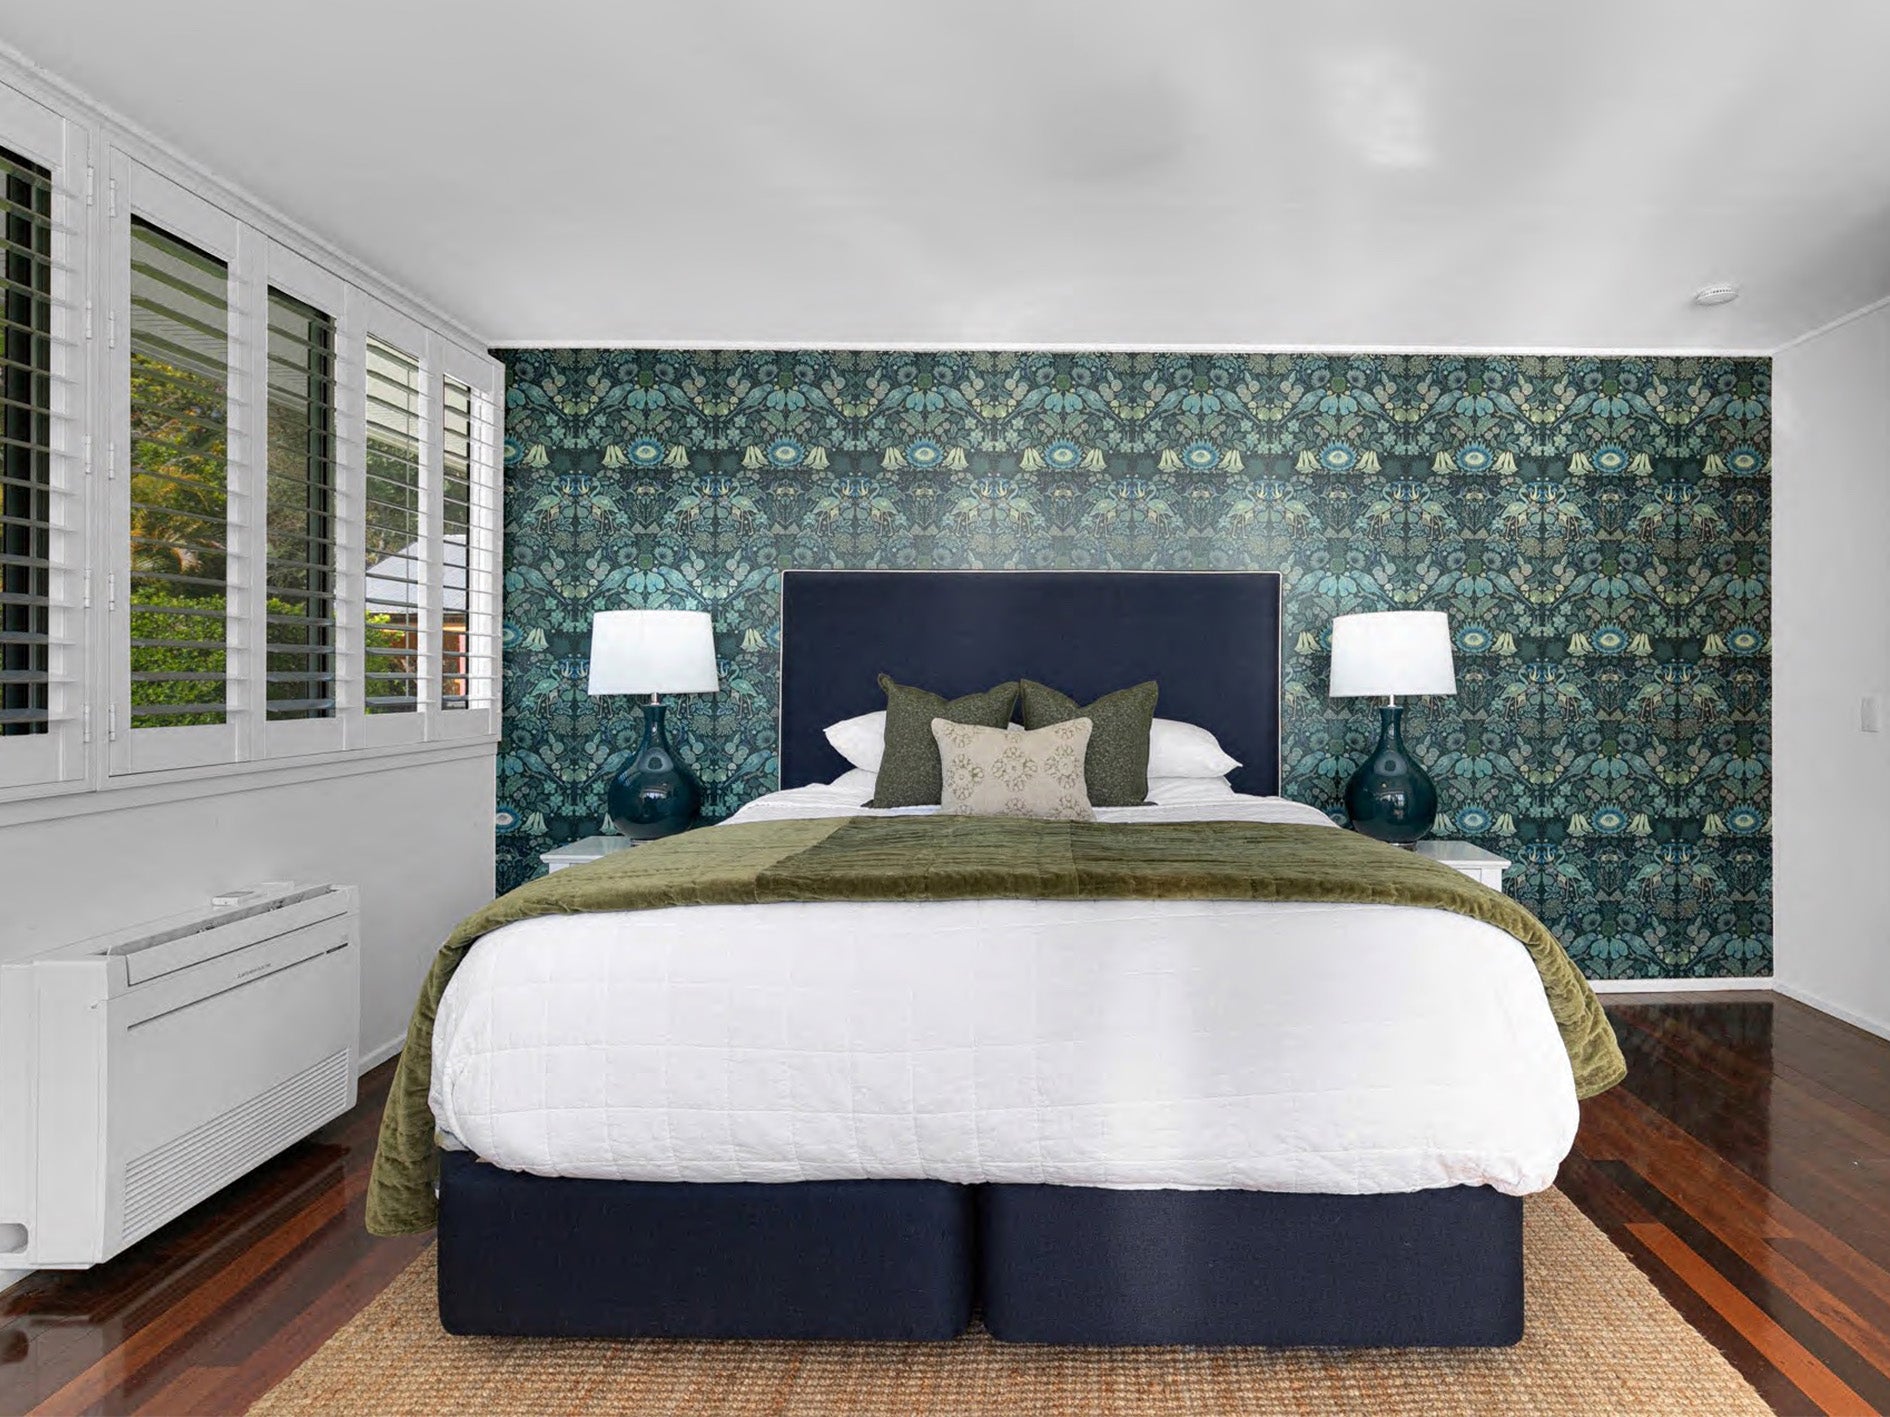 Photo of a bedroom styled by Rachel Elizabeth Interiors showing a deep olive green floral wallpaper feature wall behind navy blue upholstered bed with white bedspread and olive green velvet throw and feature cushions.